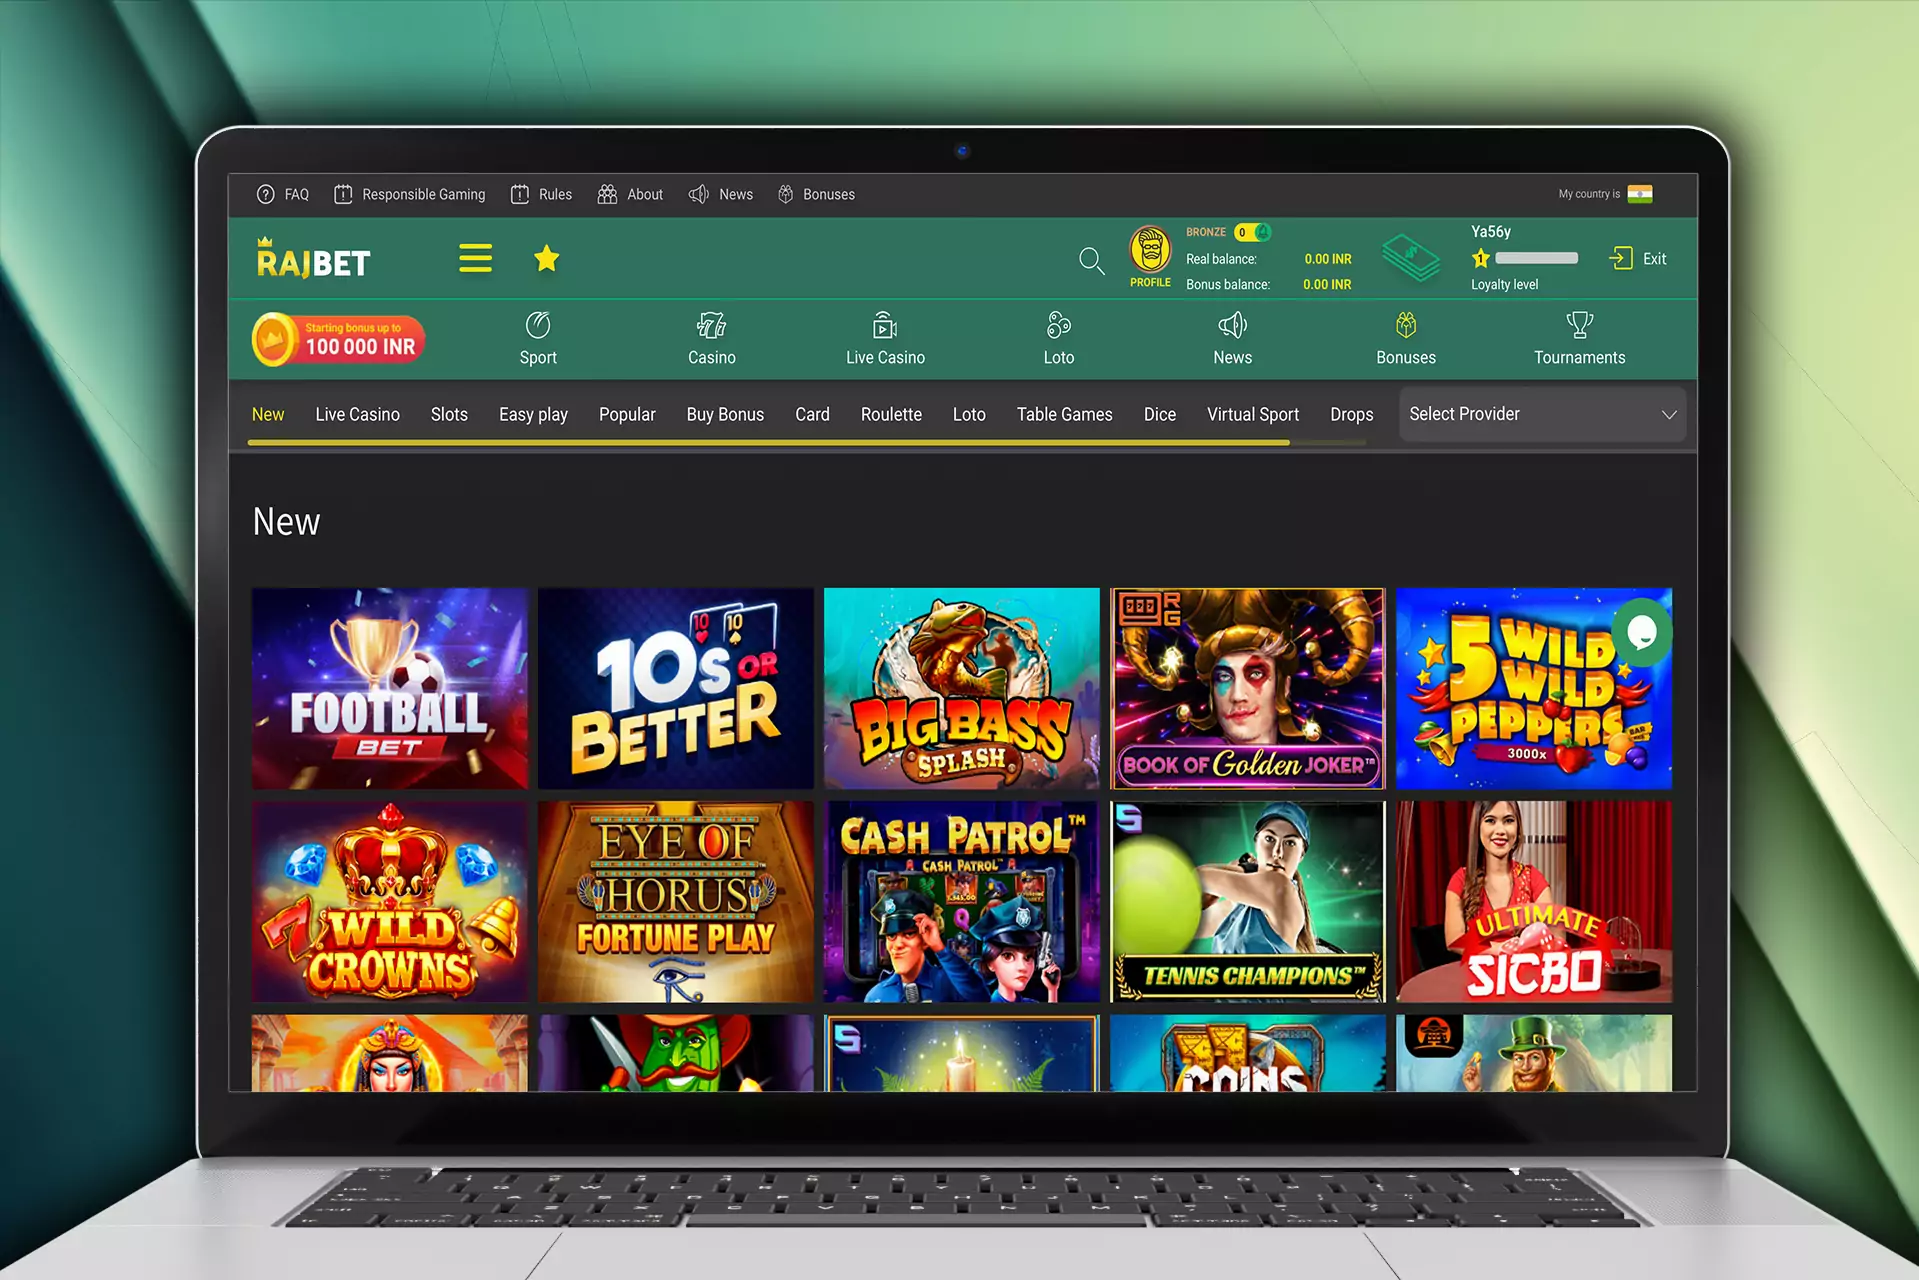 Rajbet supports online casino on the official website.